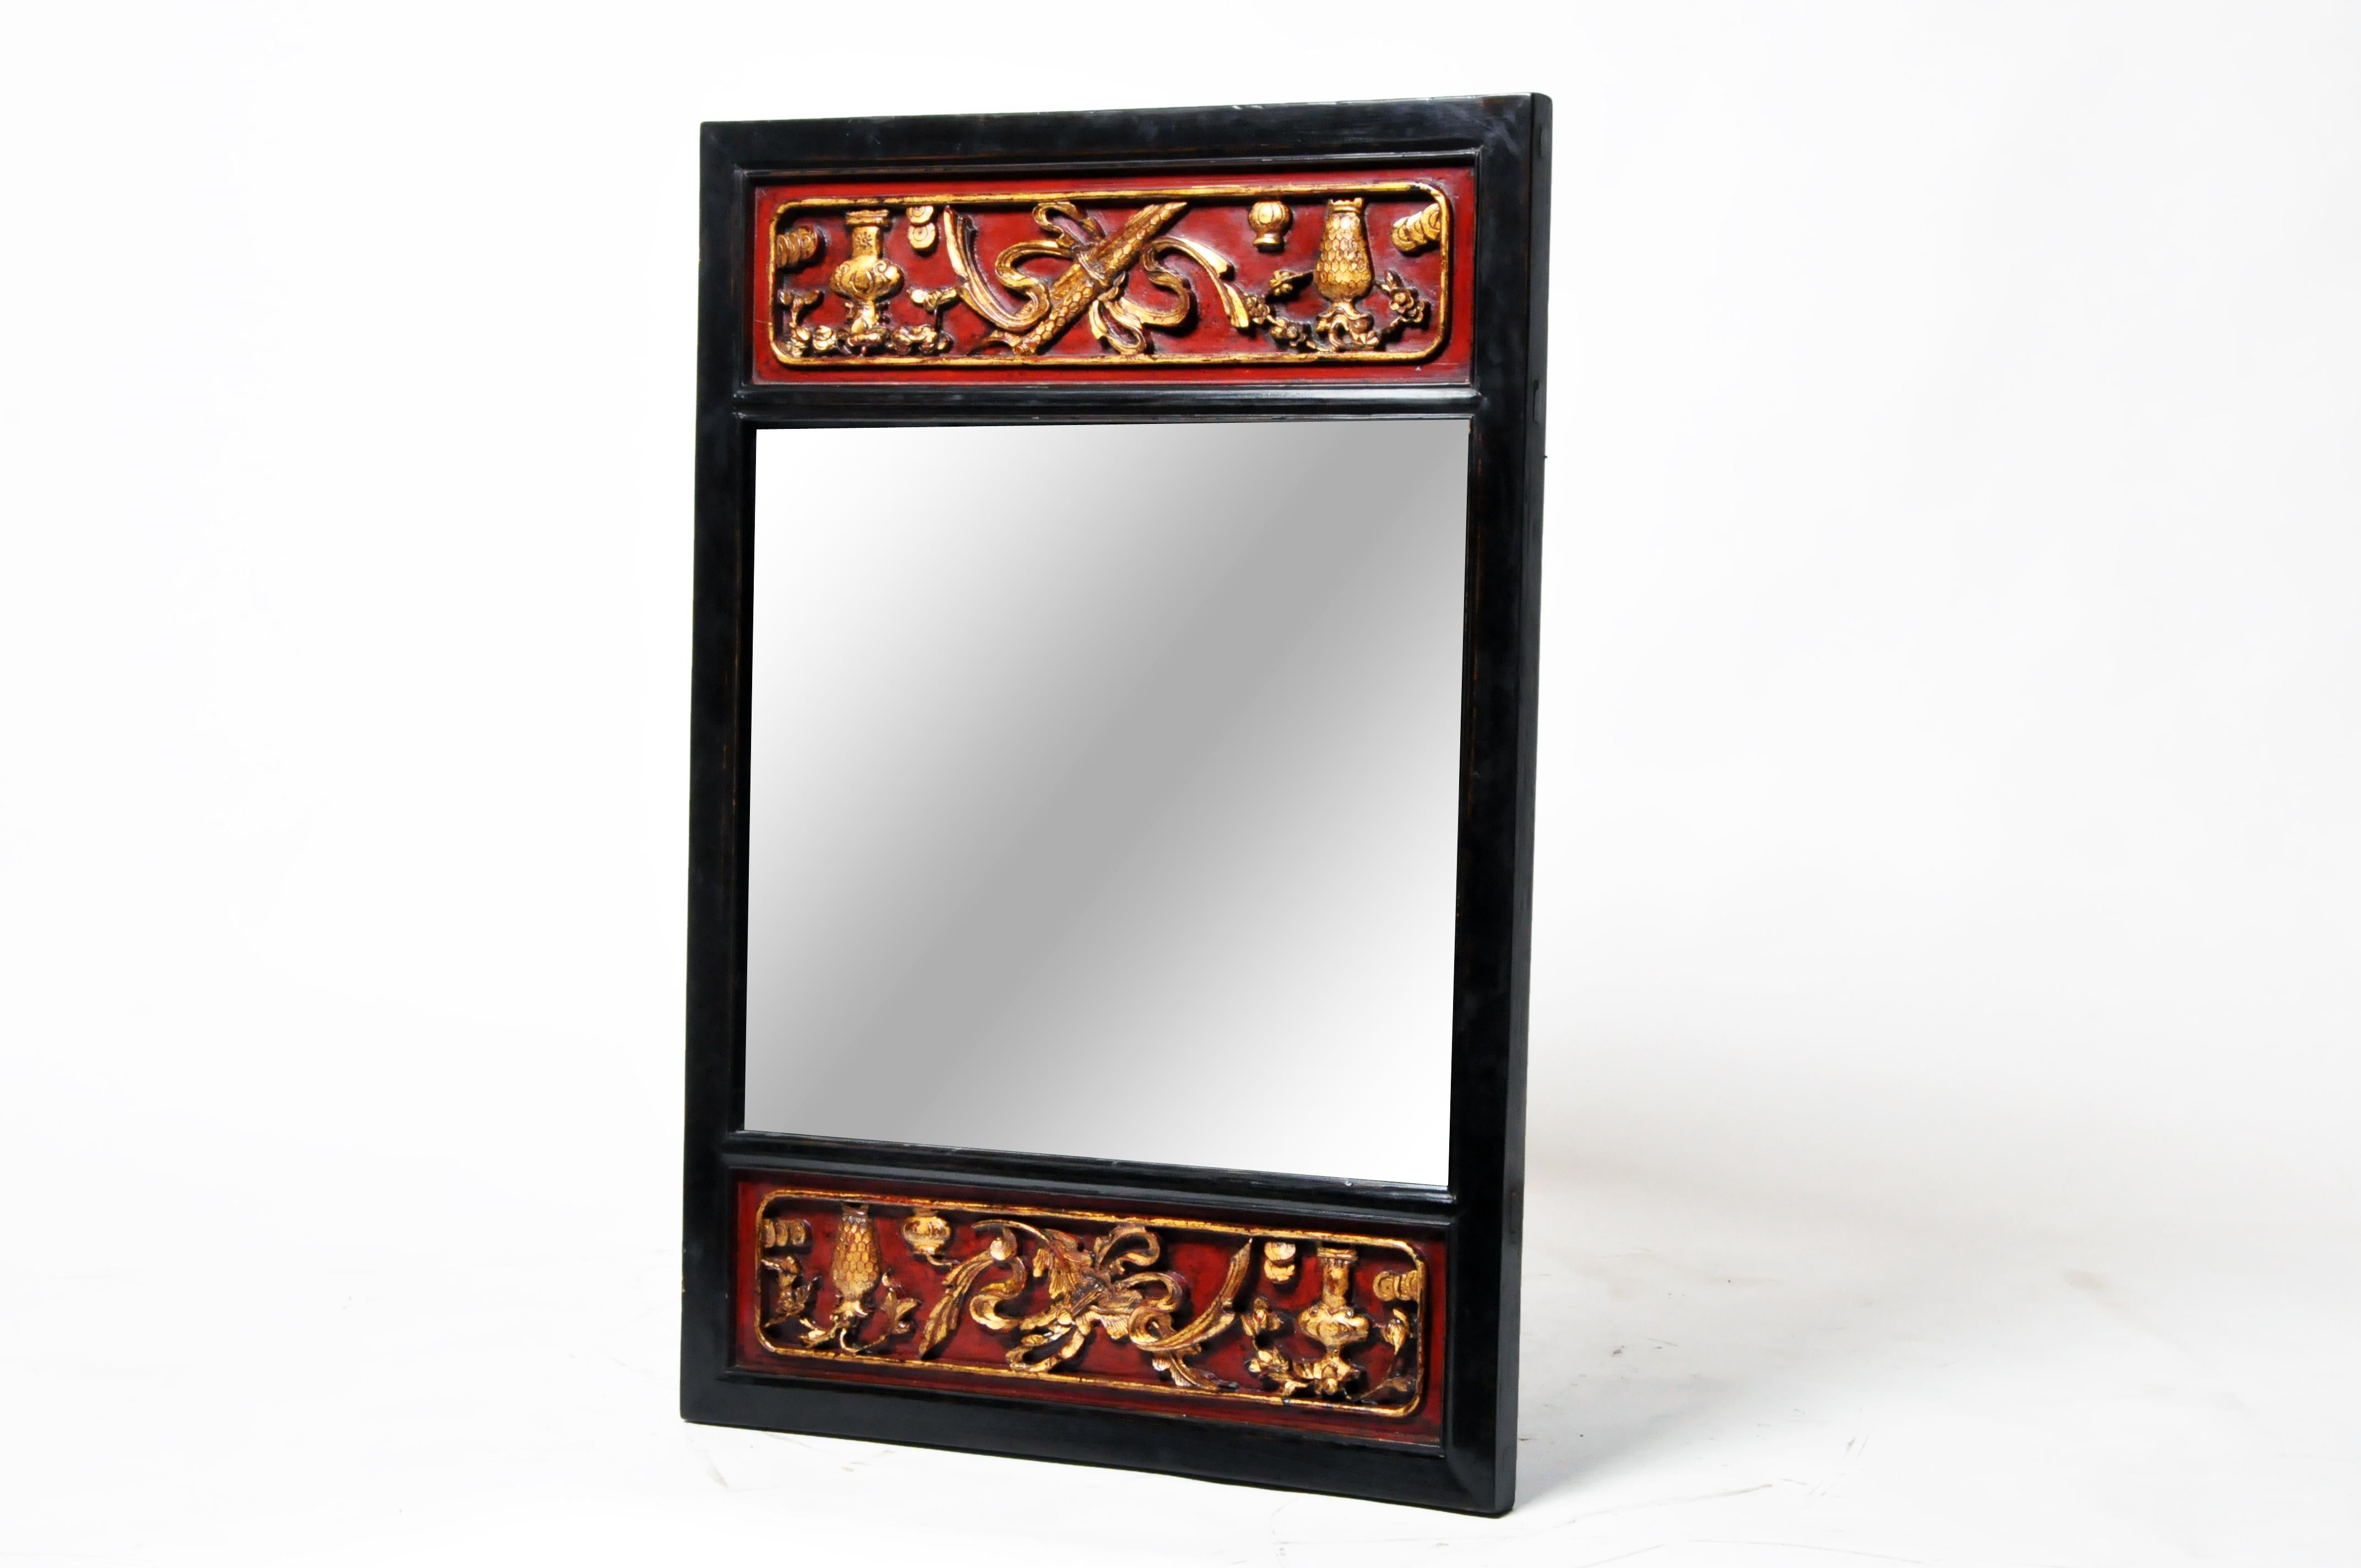 This gilt-and-lacquer carved wooden mirror is actually part of an old interior wall in a Chinese mansion. It is carved with auspicious symbols and restored with a French polish finish. The mirror glass is new but the old frame probably dates to